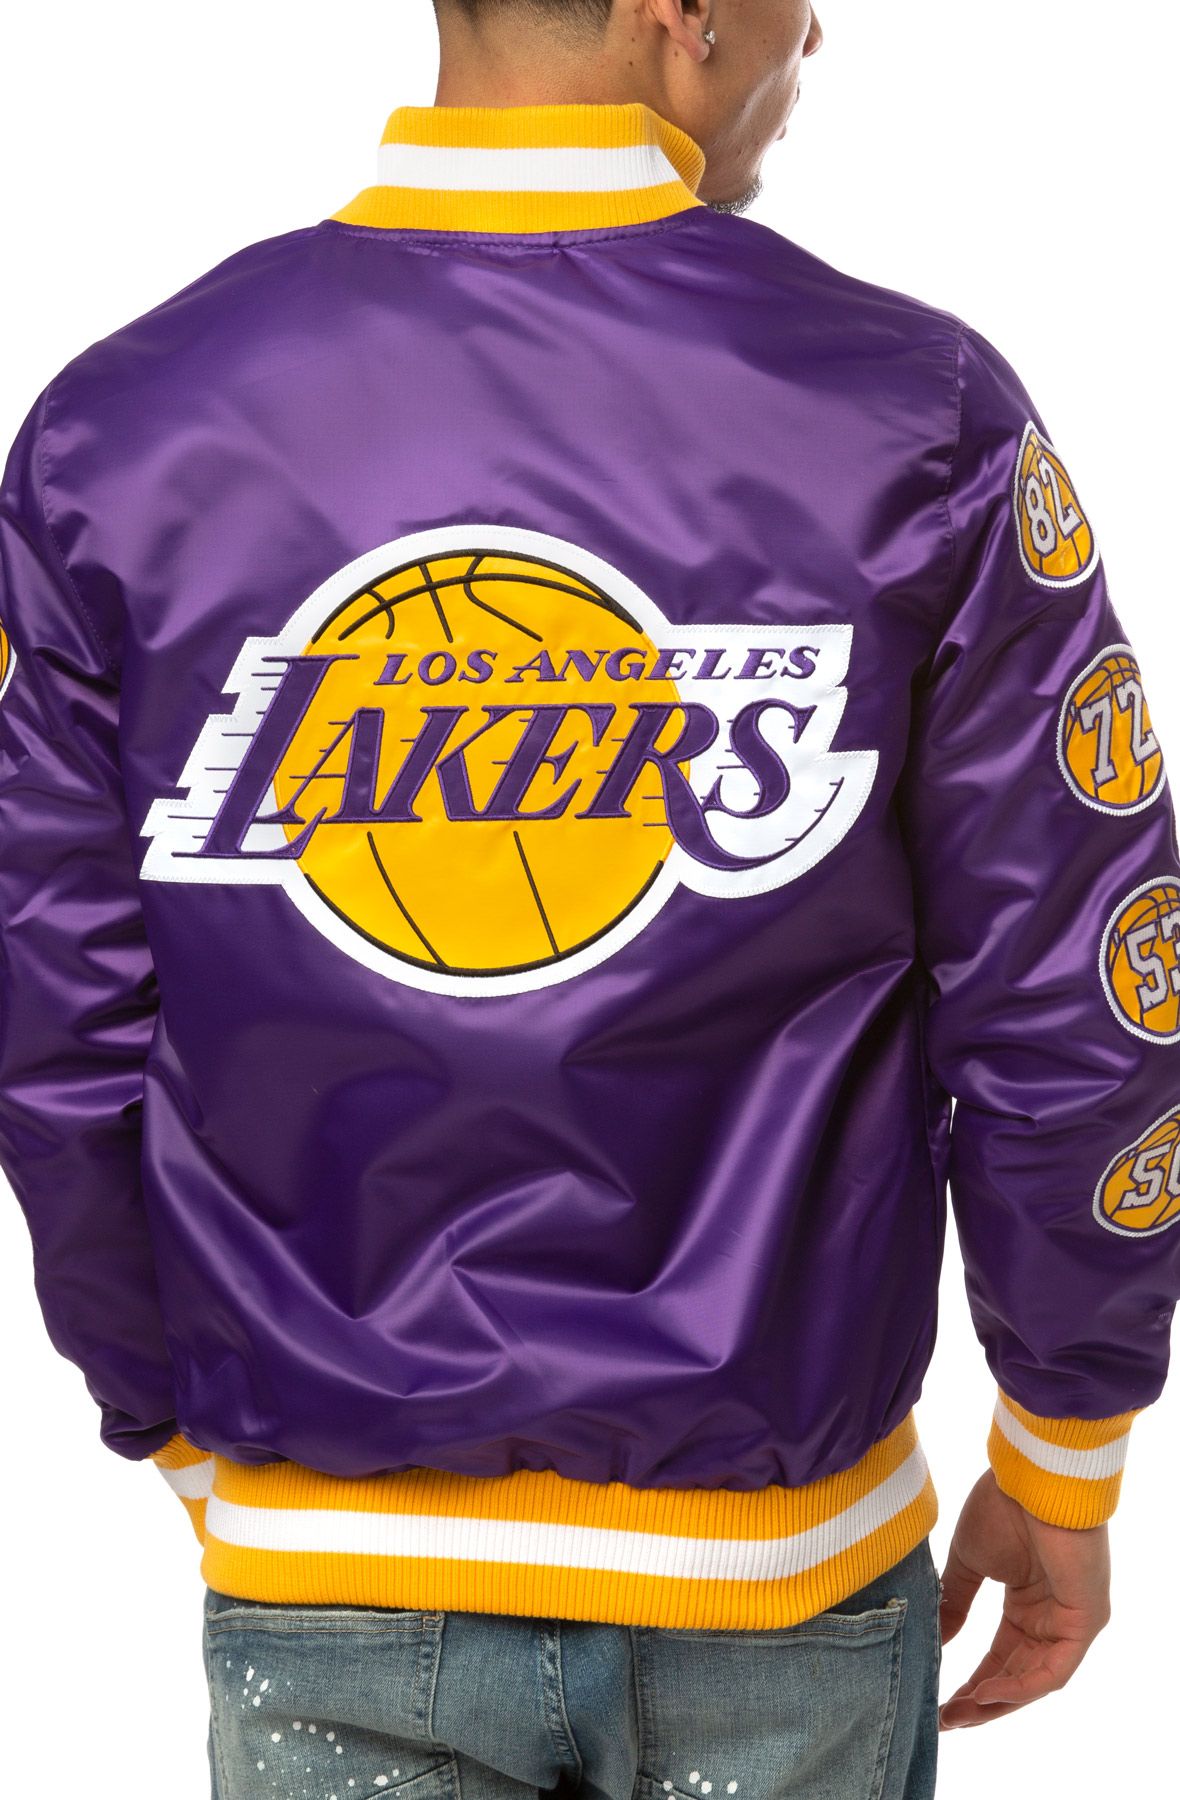 Yellow/Black Starter 17 Patches Los Angeles Lakers Champs Jacket - Jackets  Expert